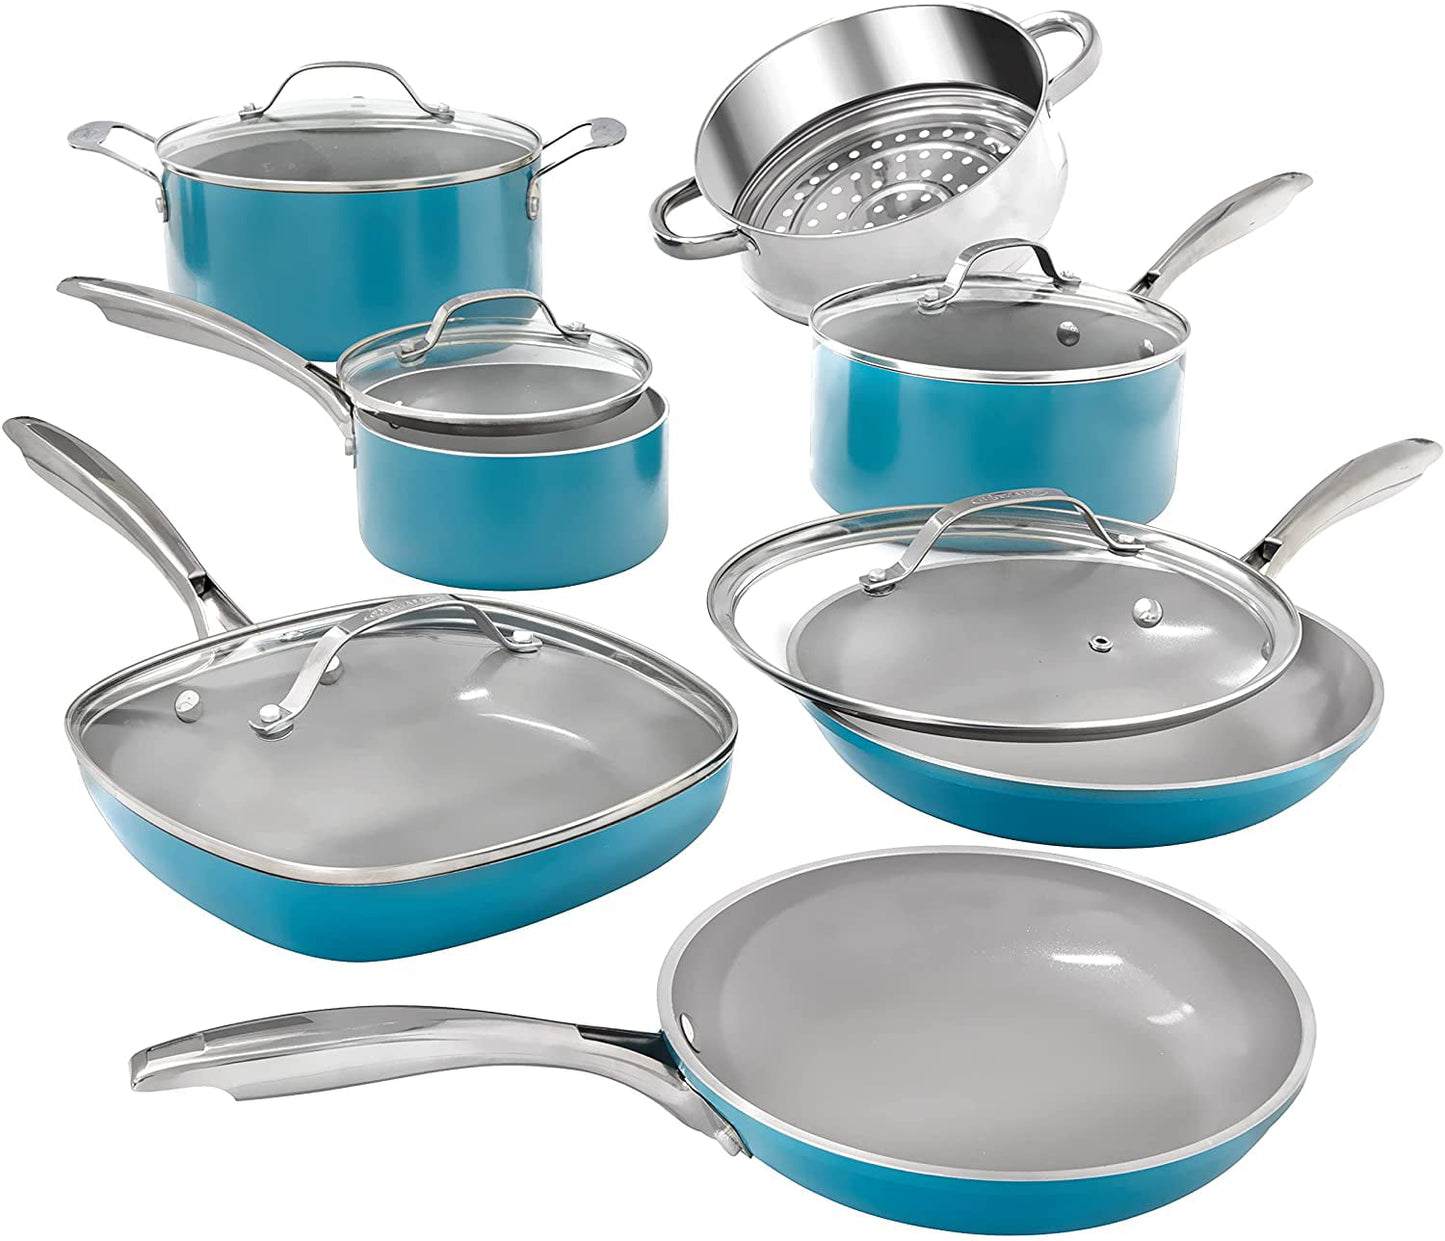 Gotham Steel Diamond 12 Piece Cookware Set, Non-Stick Copper Coating, Includes Skillets, Frying Pans and Stock Pots,Dishwasher